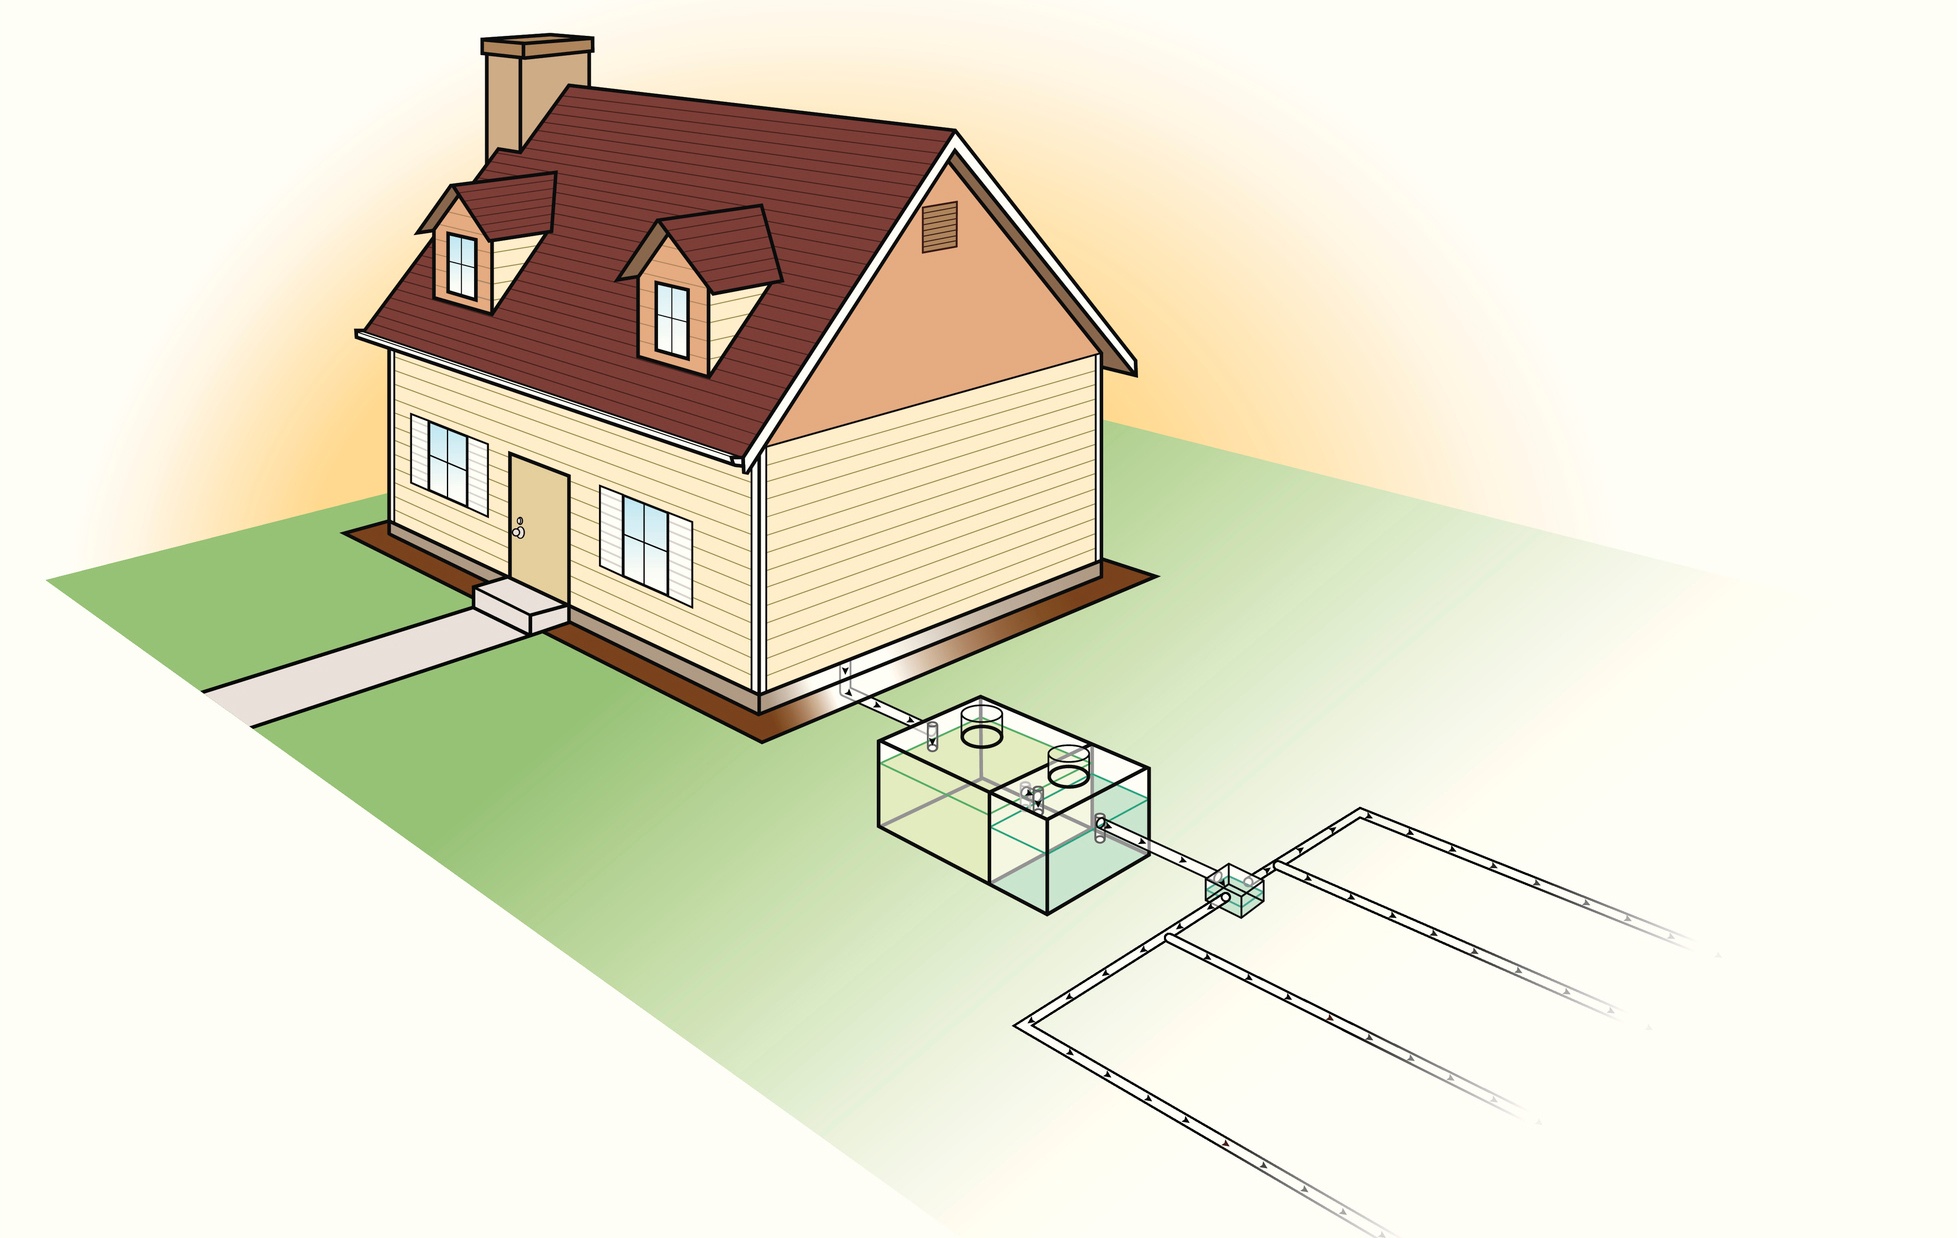 How to install a septic system in Nassau County, Florida